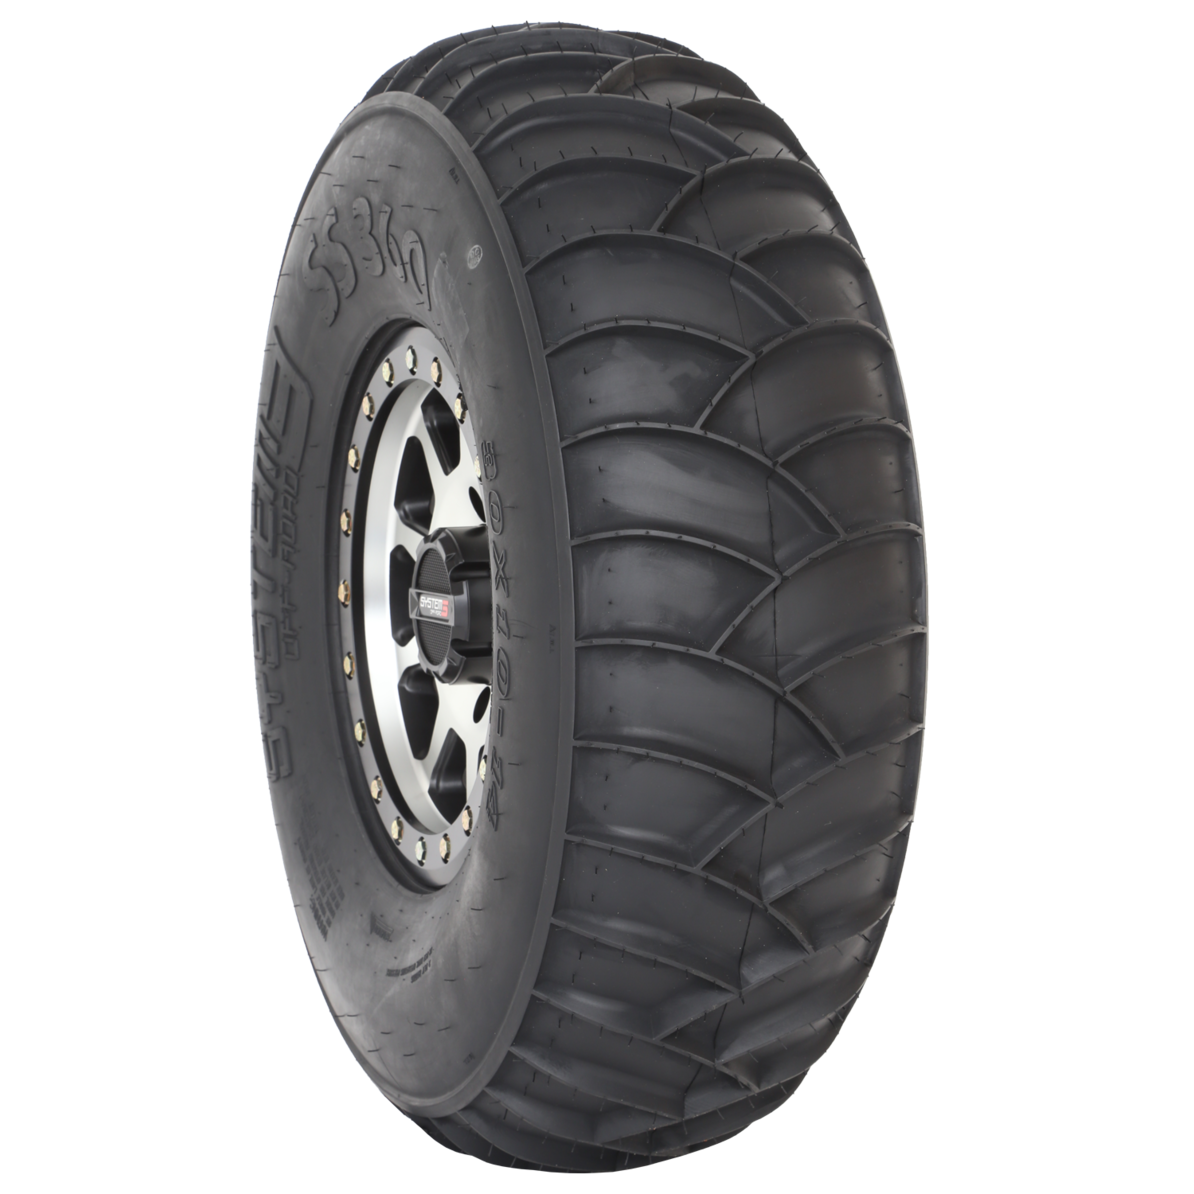 System3 Offroad SS360 Sand / Snow Tires